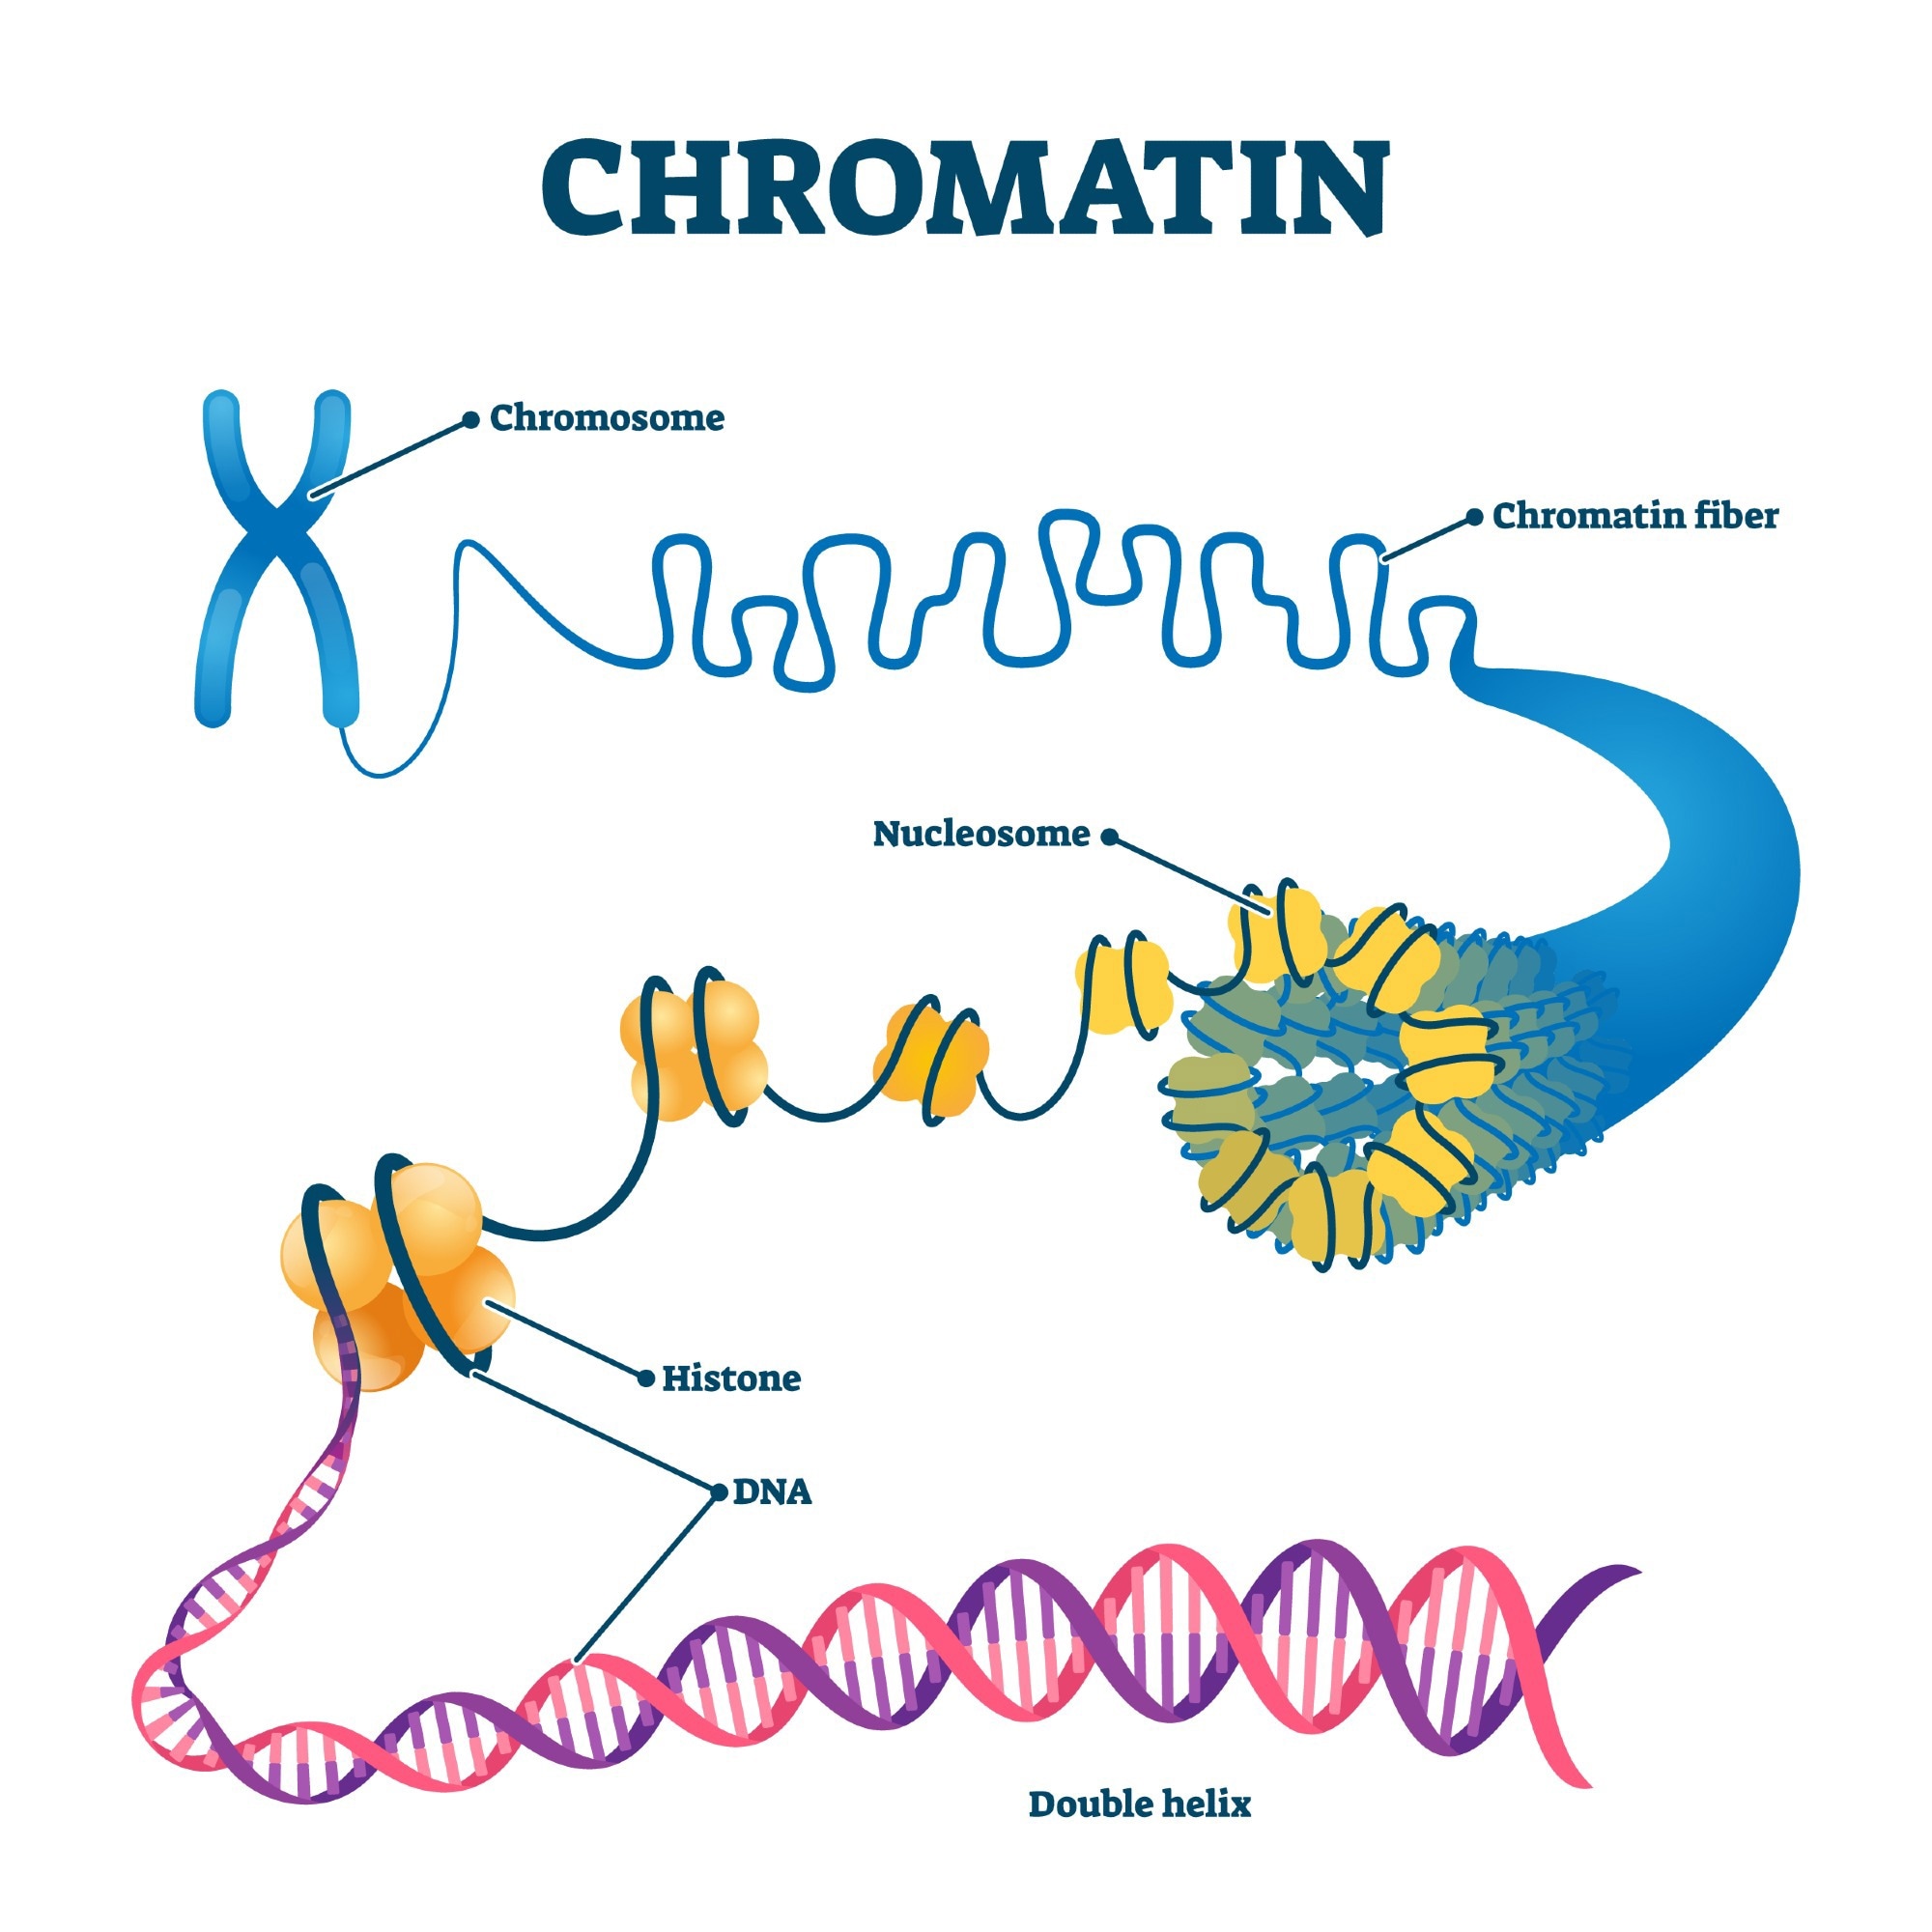 Chromation biological diagram vector illustration. Close-up with nucleosome, histone and DNA double helix. Science educational information. Chromosome structure elements graphic example model. Image Credit: VectorMine/Shutterstock.com